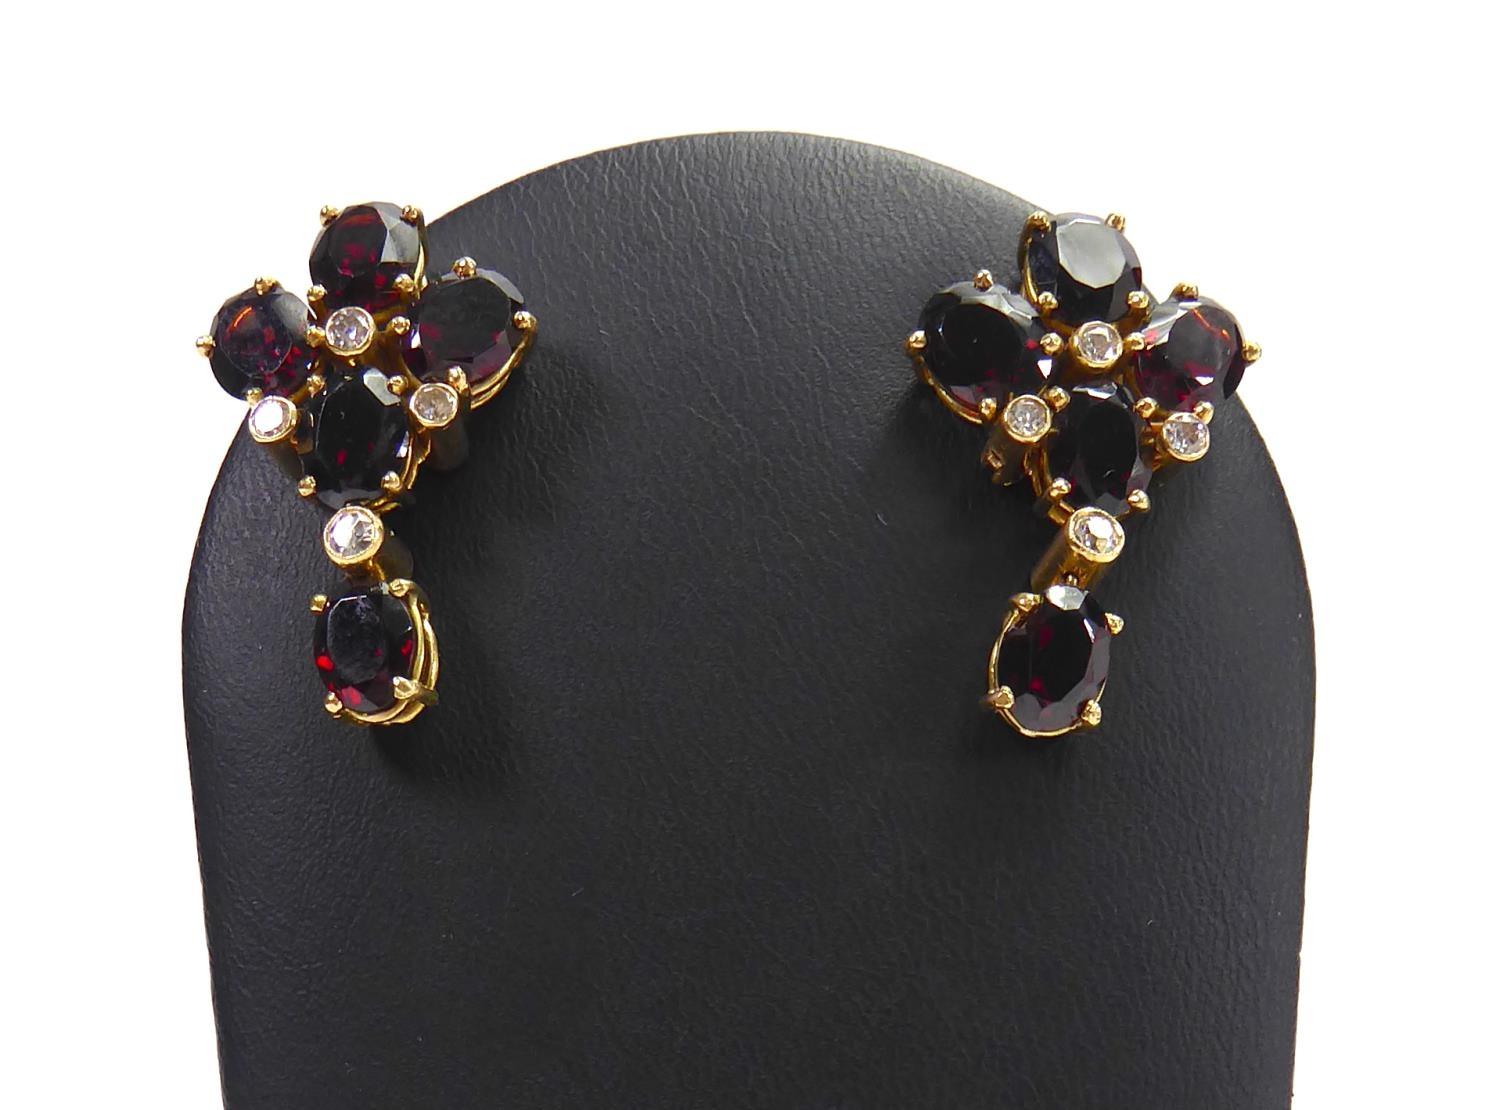 A GARNET AND DIAMOND ENCRUSTED NECKLACE AND MATCHING EARRINGS. (61.6g) - Image 11 of 23